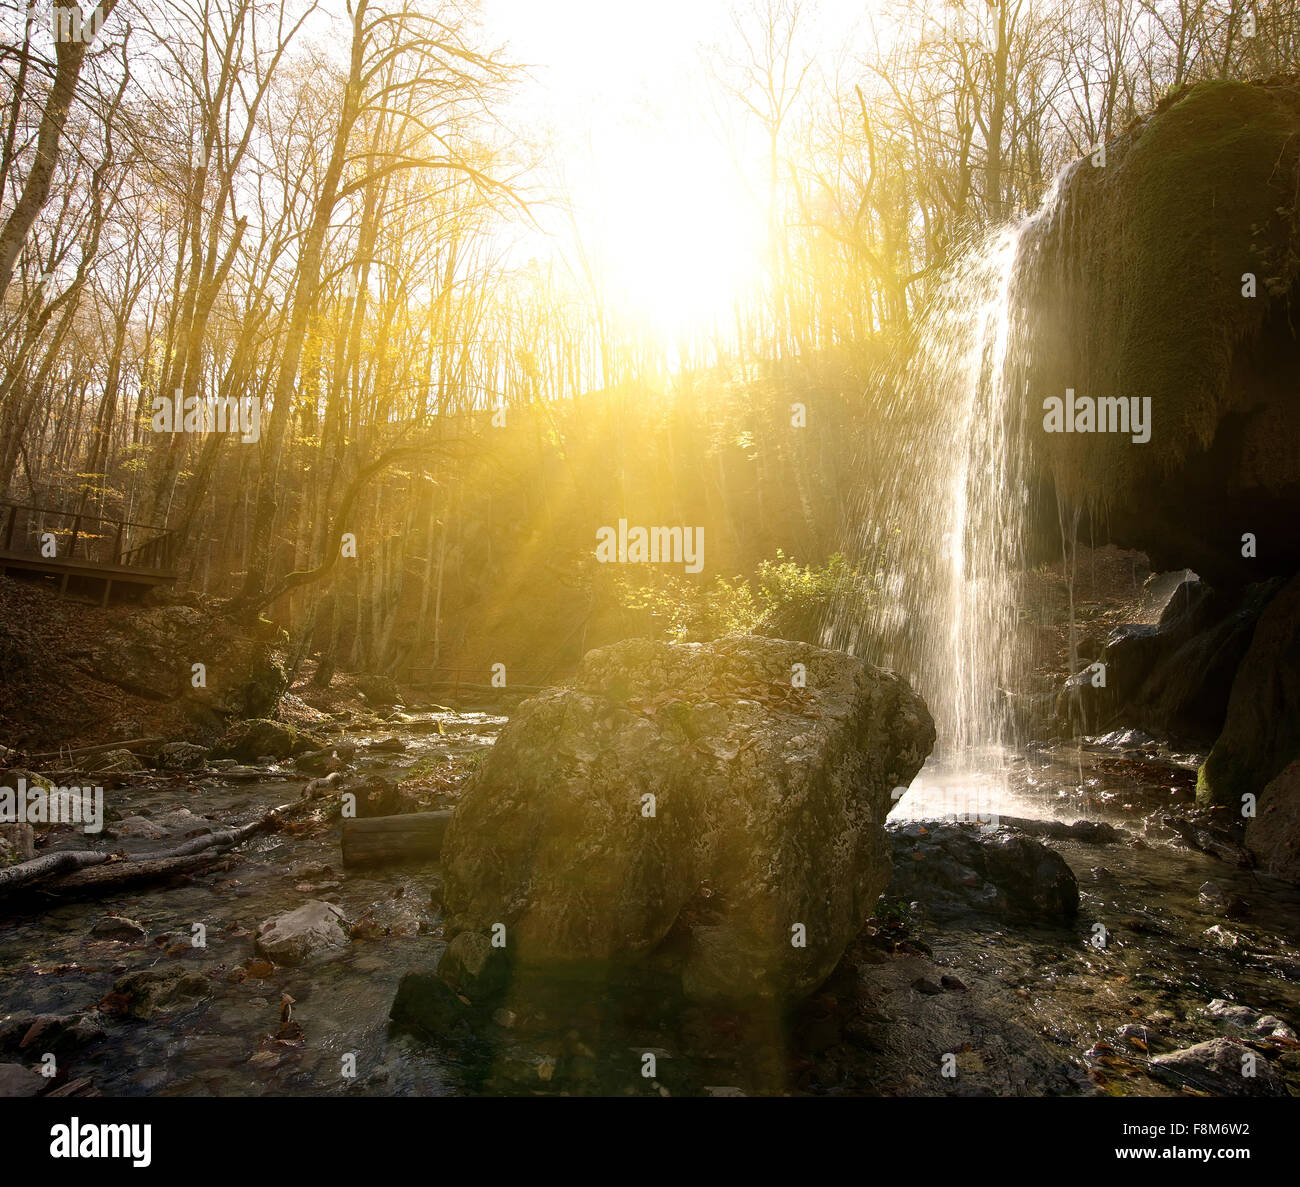 Waterfall in the wood at sunny morning Stock Photo